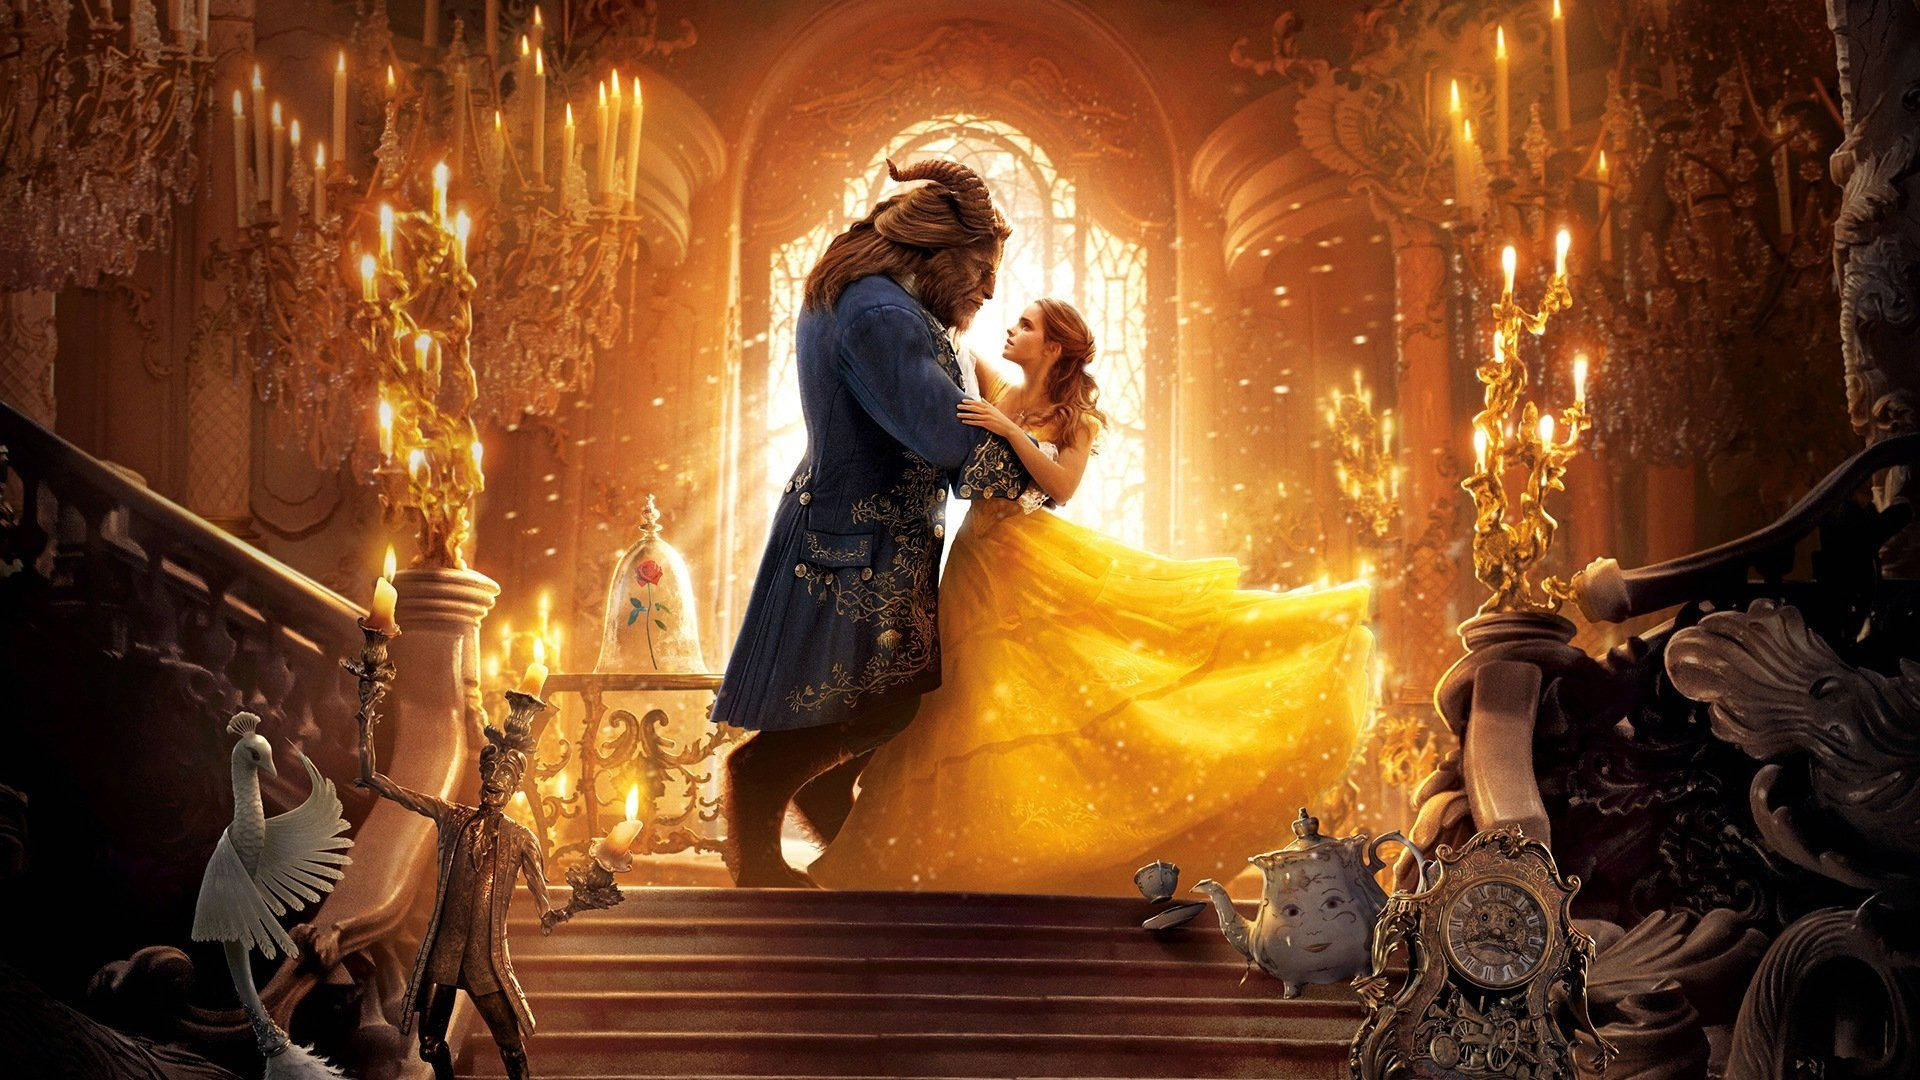 Beauty And The Beast Wallpaper Images